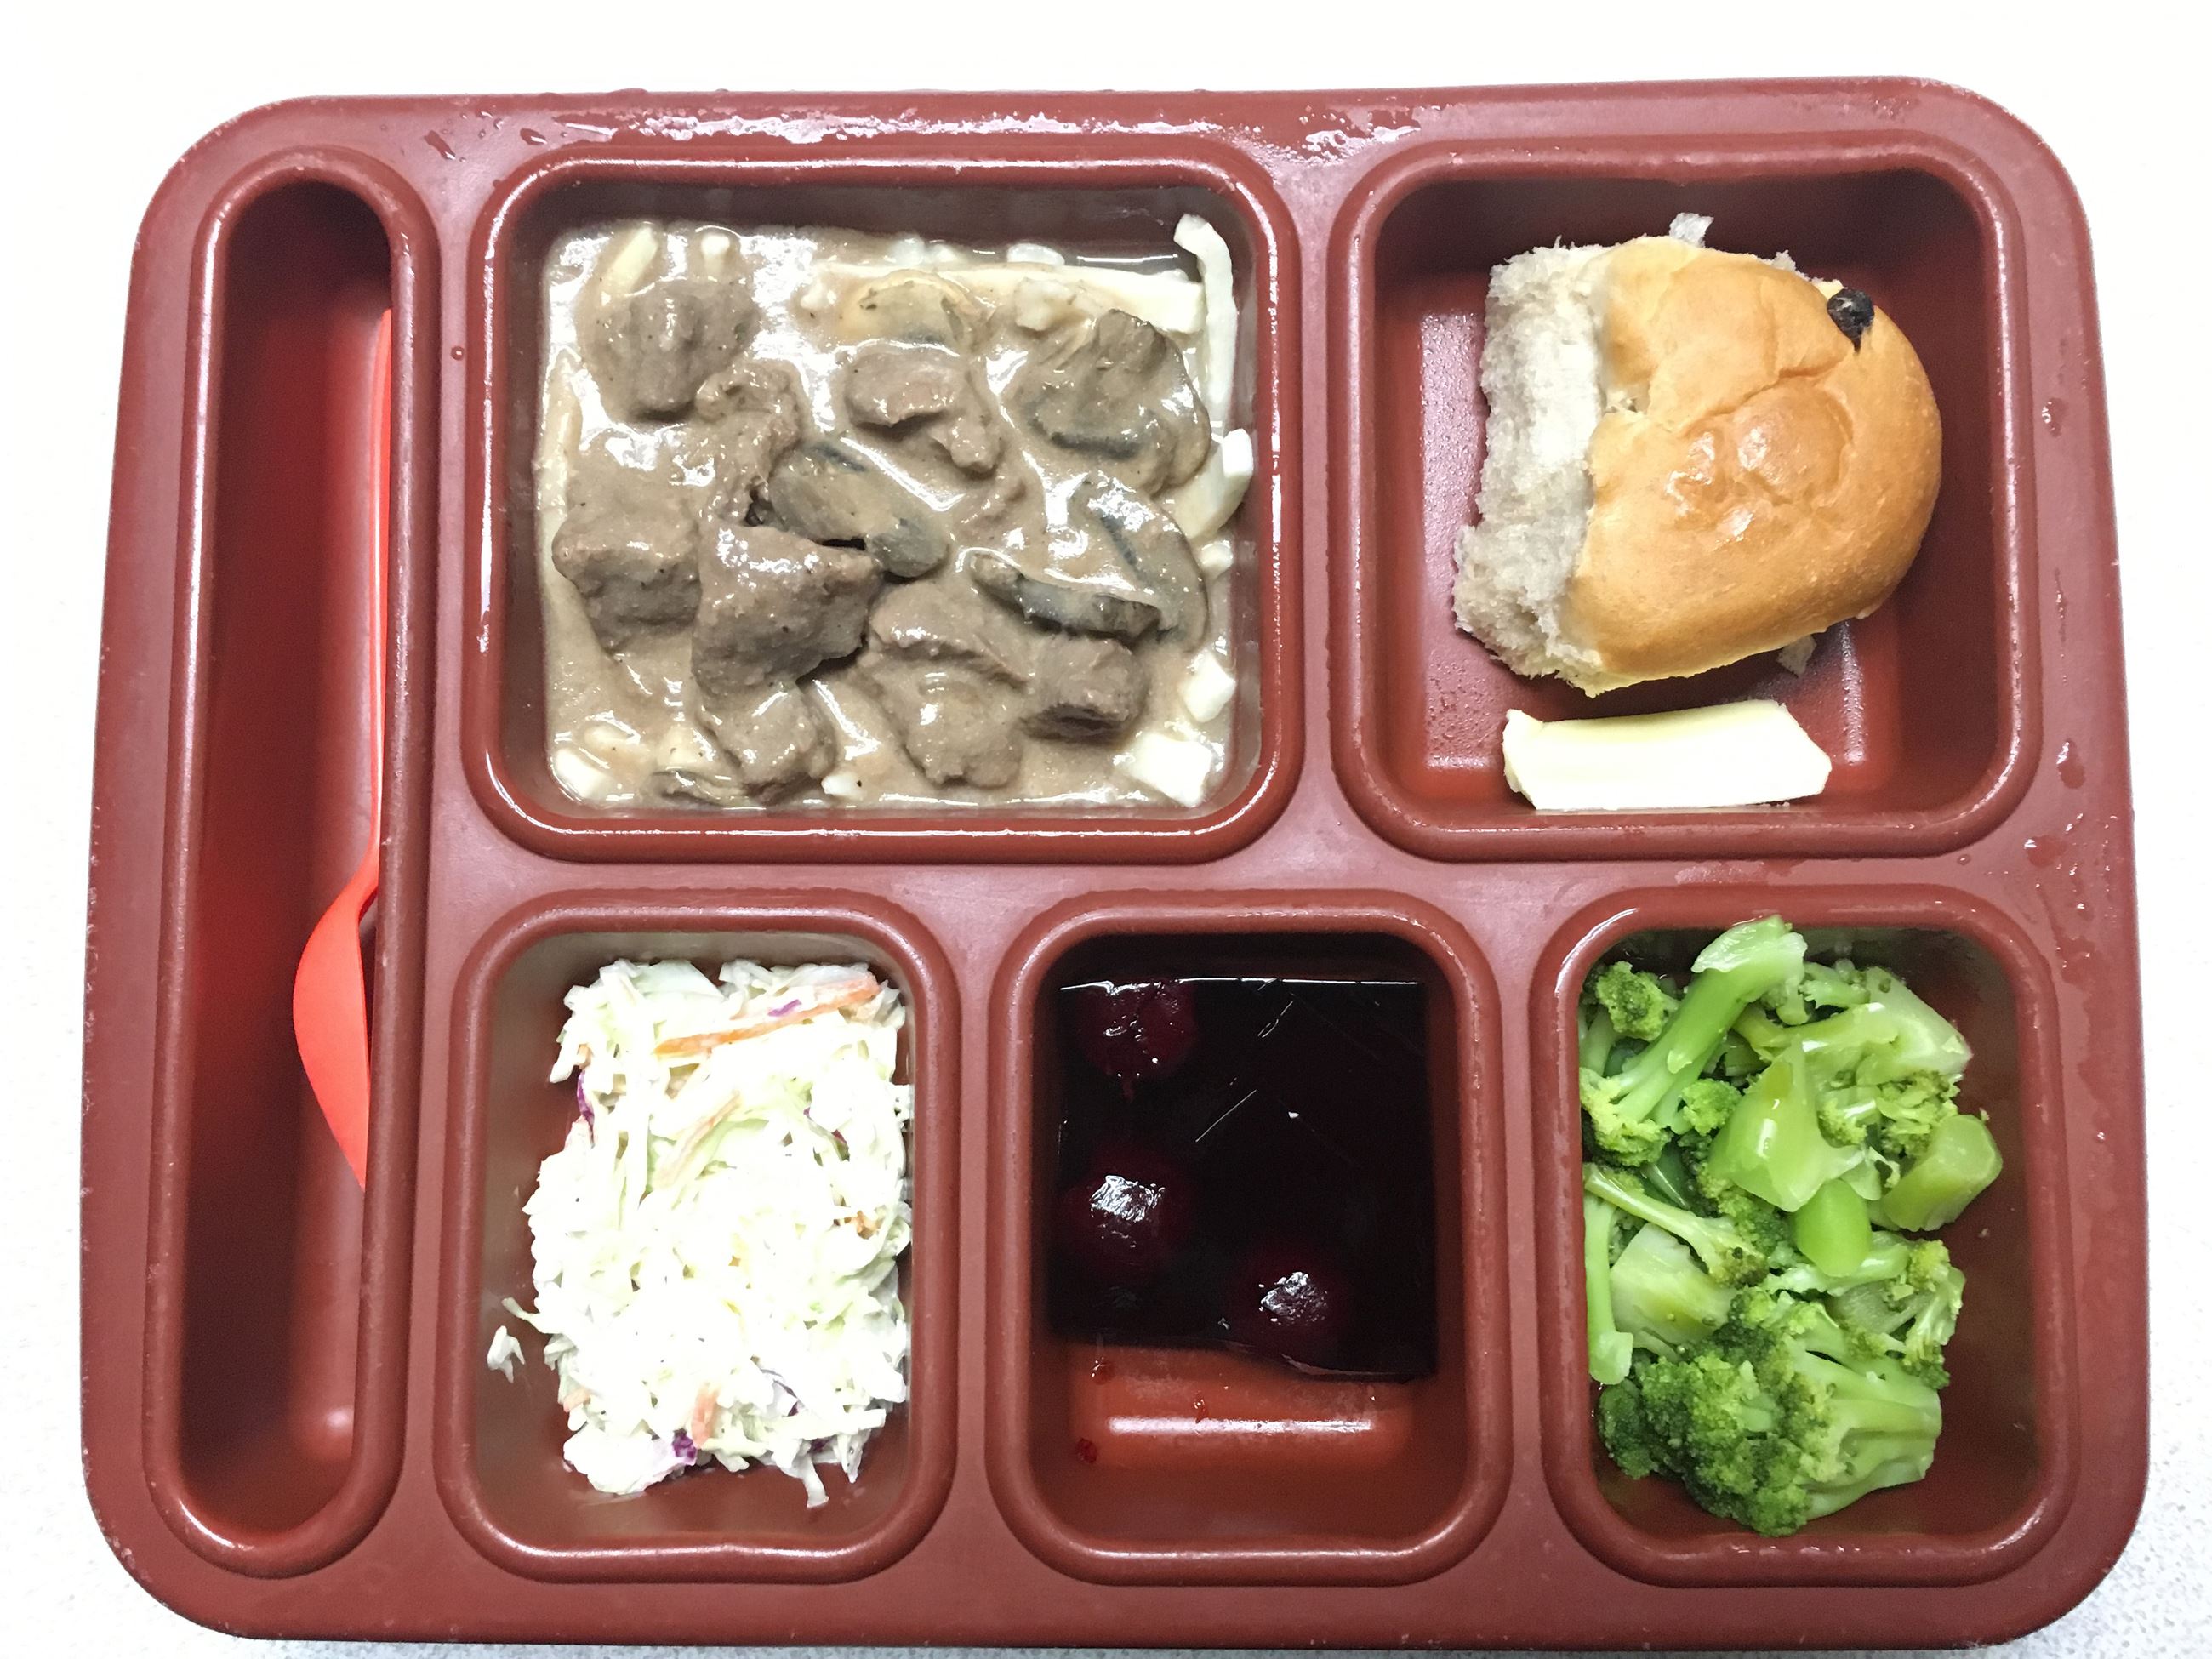 Jail Meal